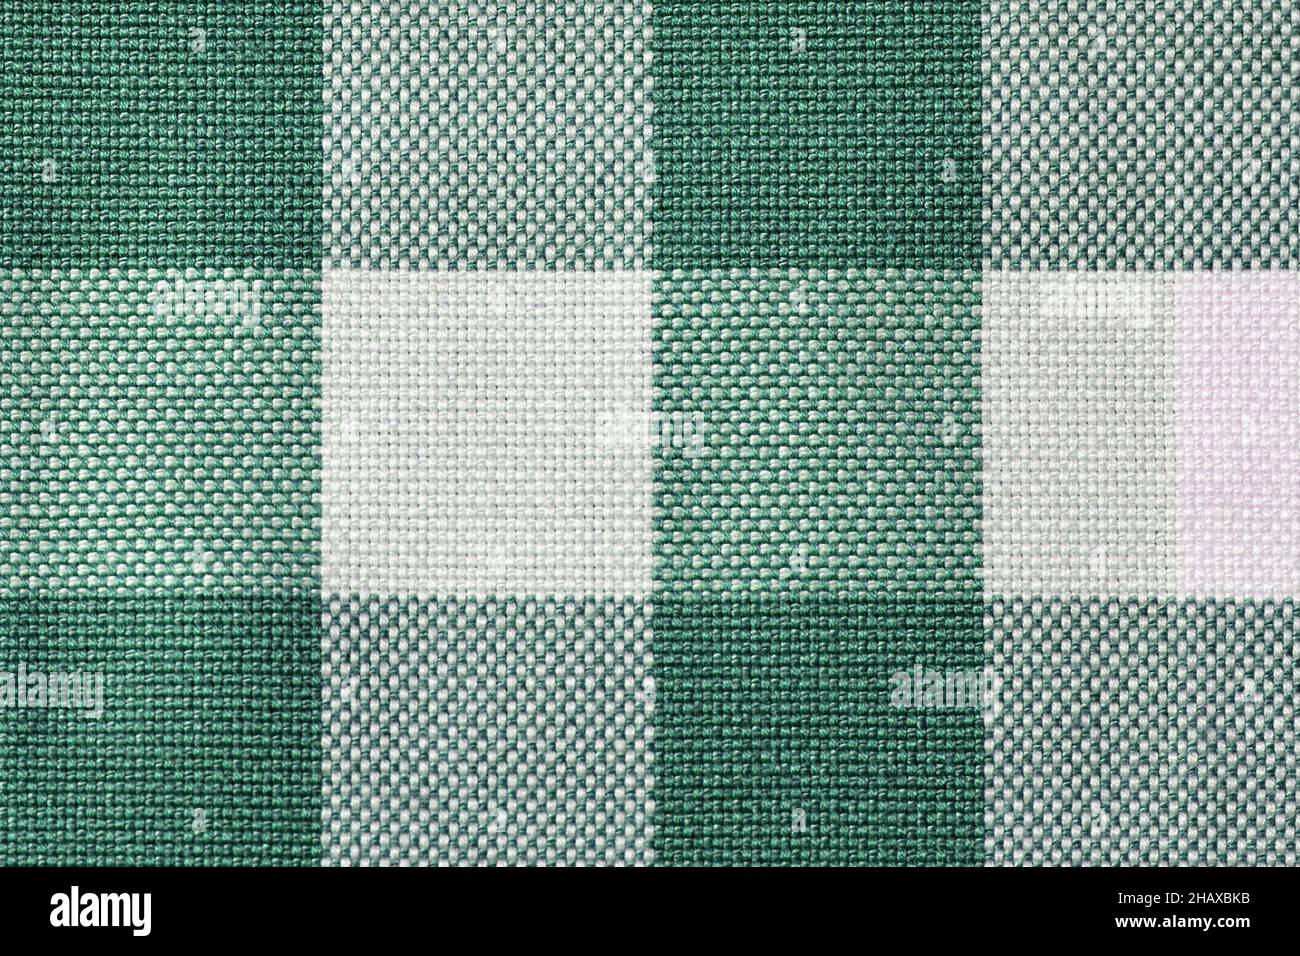 Close up of green and white checkered cotton fabric Stock Photo